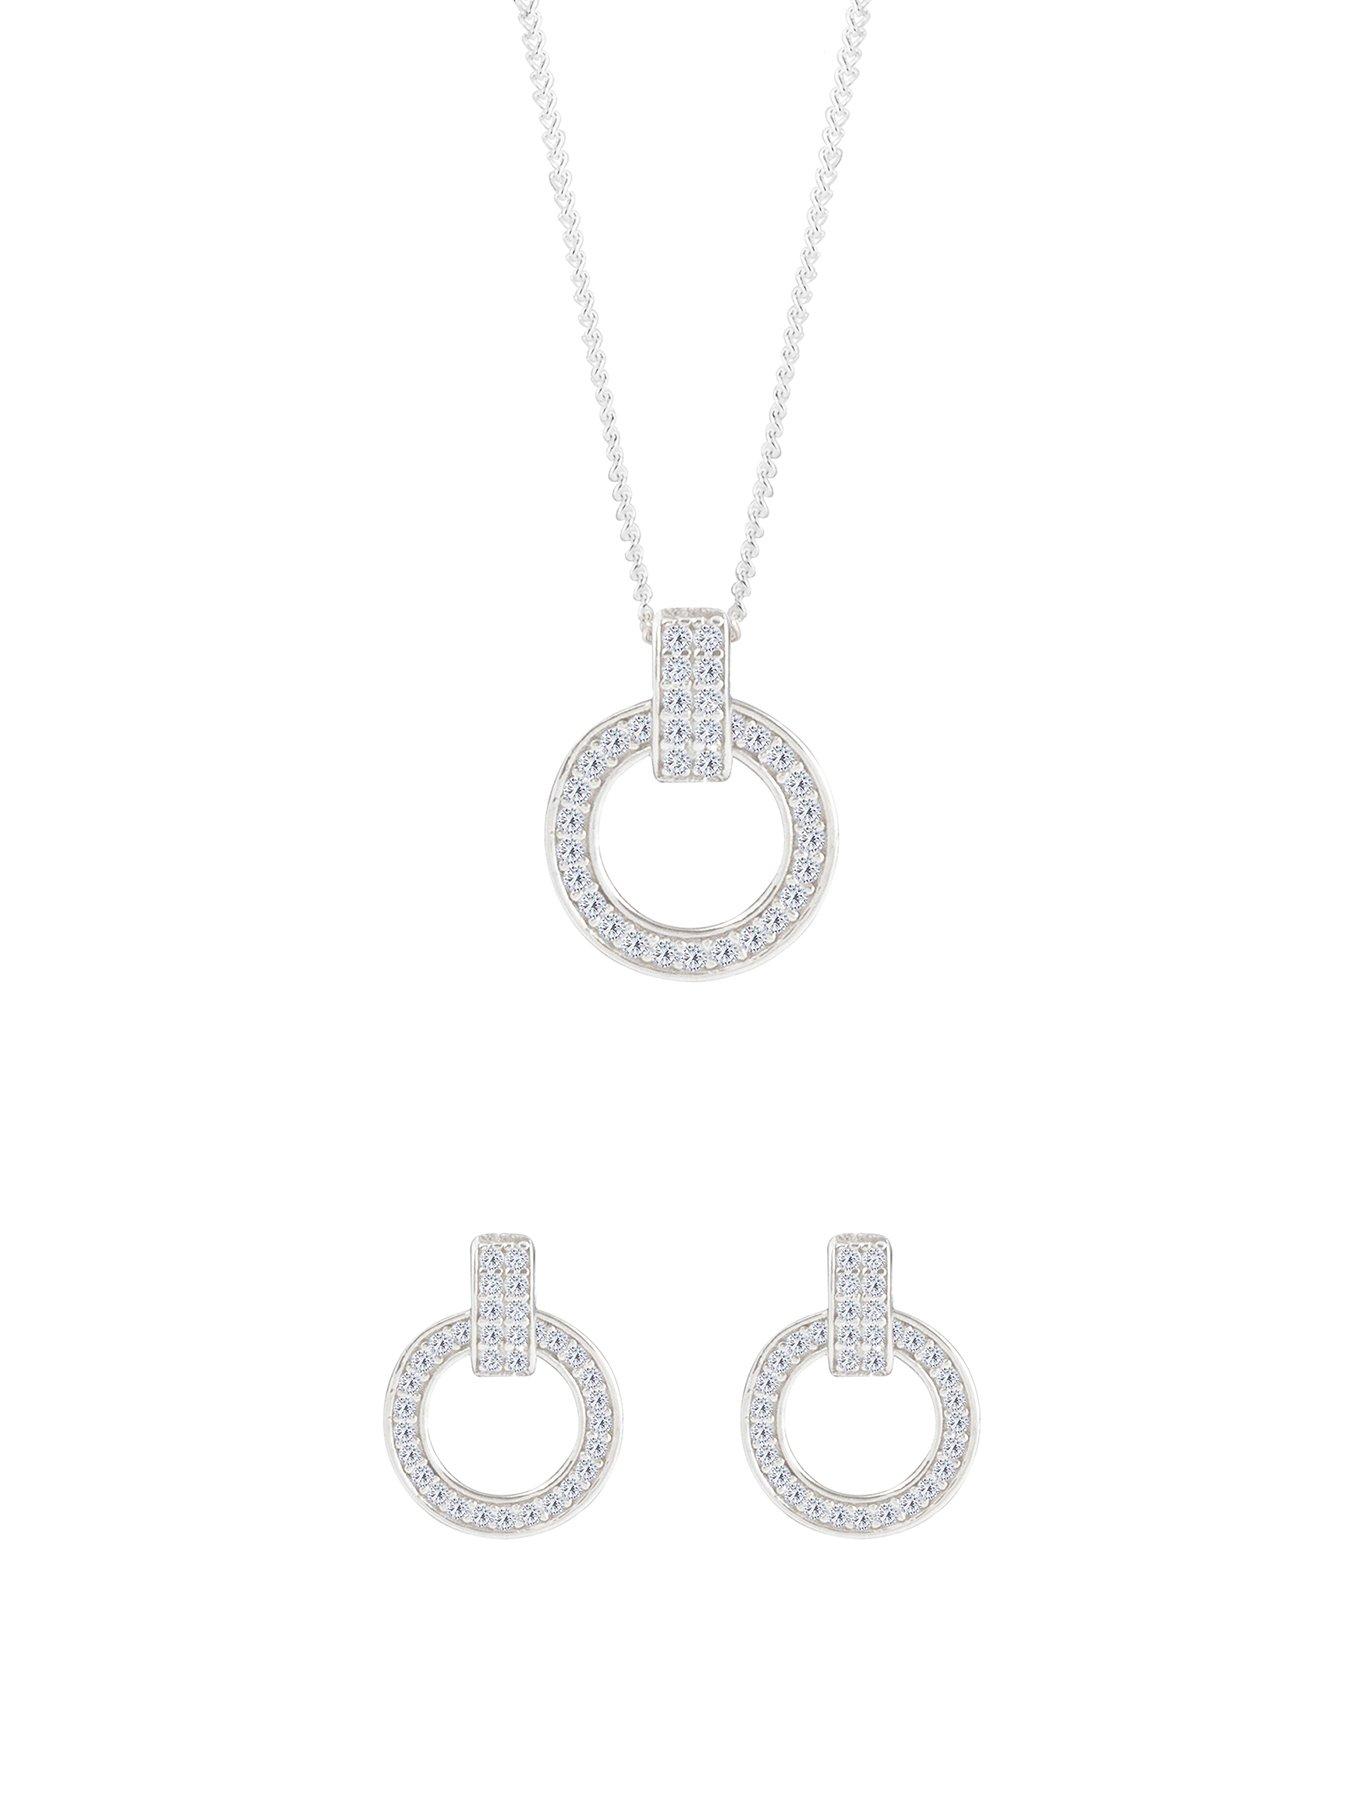  Sterling Silver Cubic Zirconia Round Earrings and Pendant Set